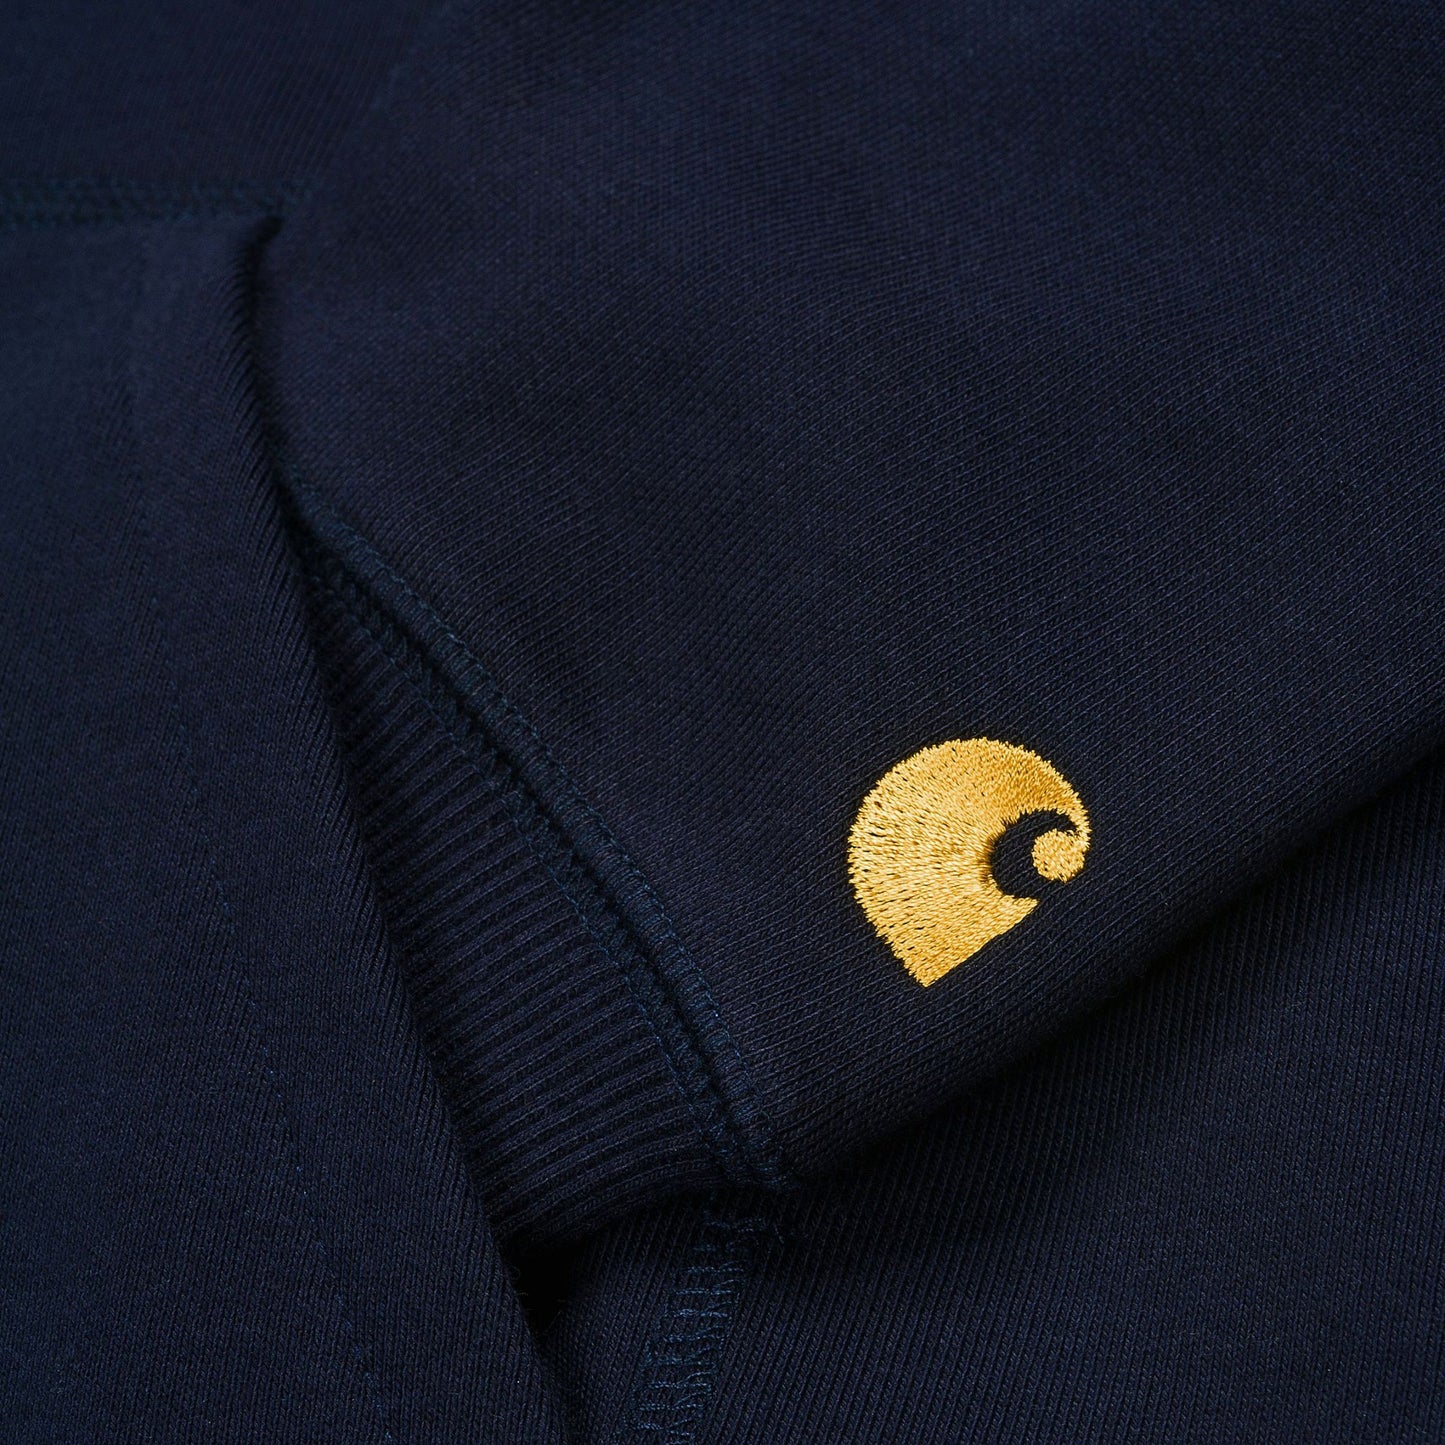 CARHARTT WIP - Hooded Chase Sweat